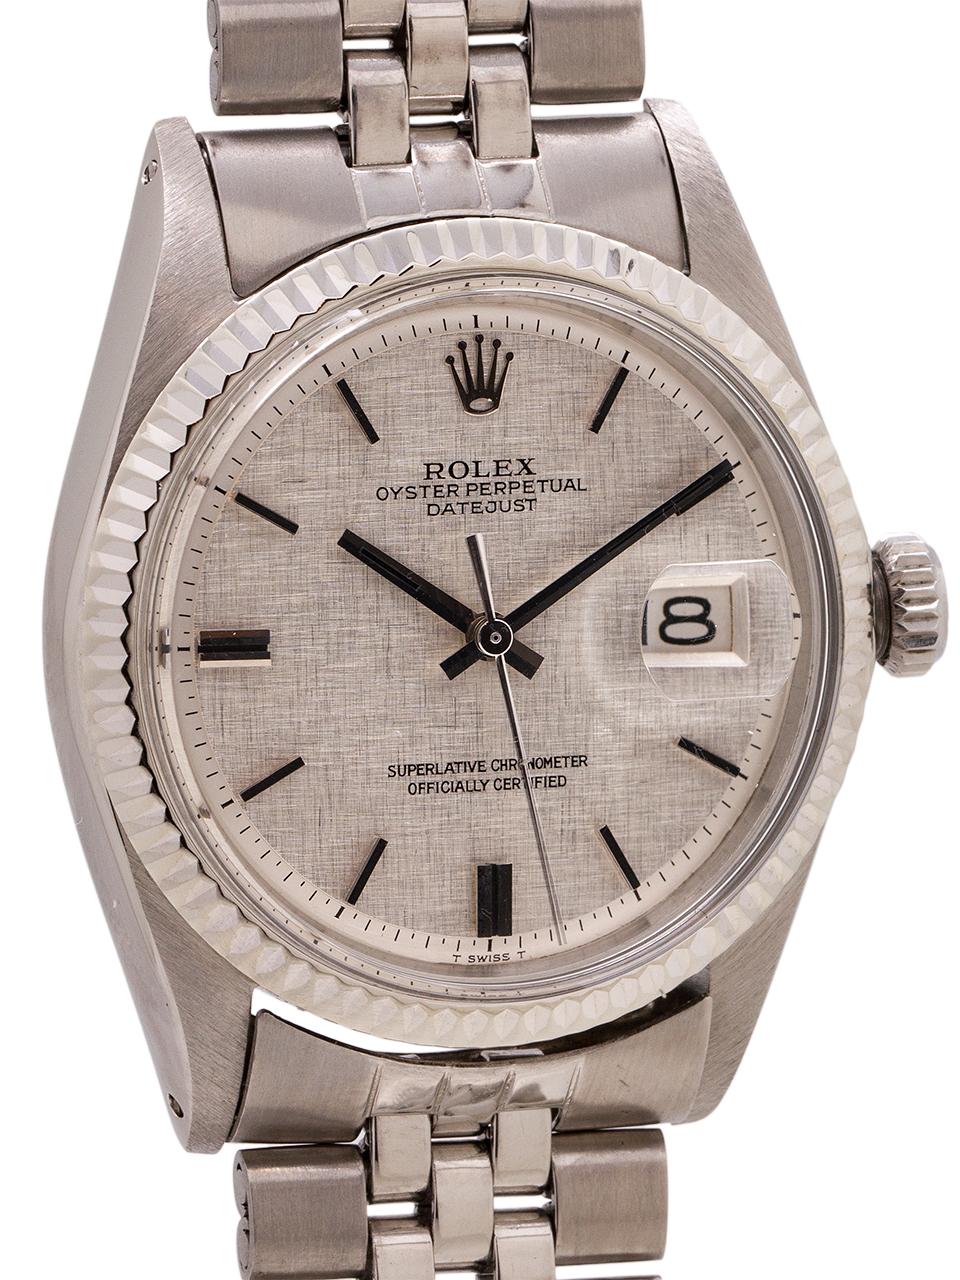 
Rolex Datejust stainless steel ref 1601, serial# 2.4 million circa 1969. Featuring 36mm diameter Oyster case with acrylic crystal, and very distinctive silver satin, linen finish dial with applied silver indexes and silver baton hands. The dial is